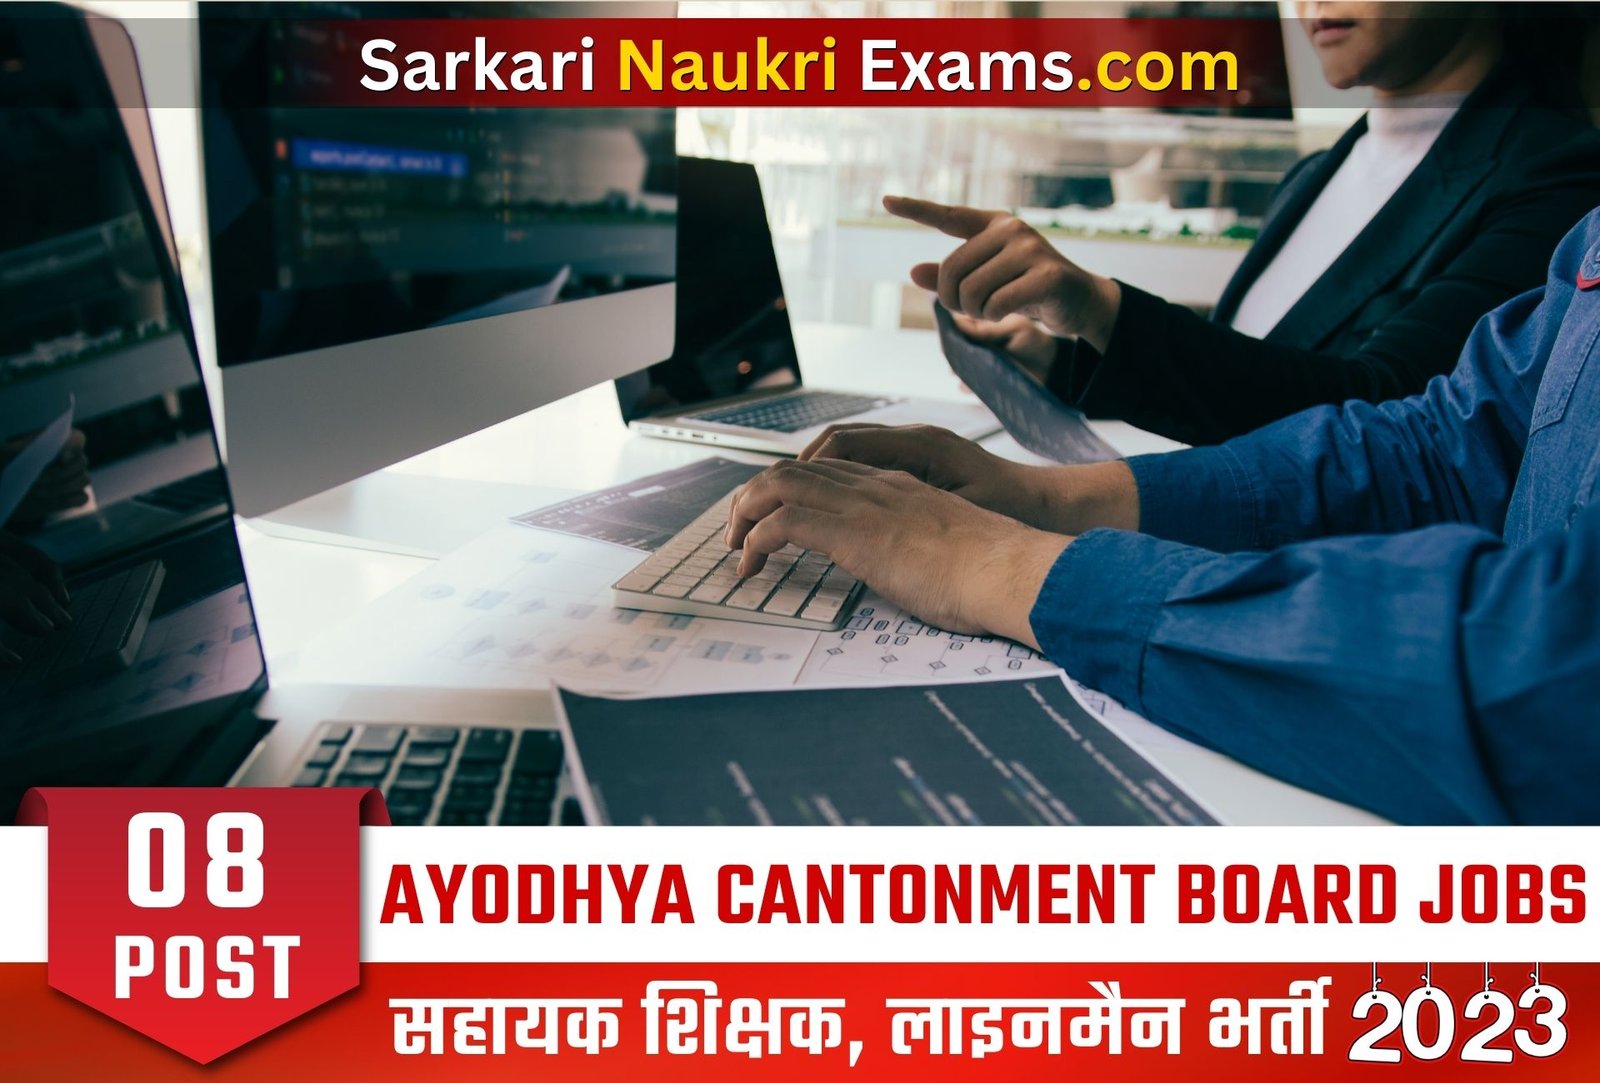 Ayodhya Cantonment Board Recruitment Form 2023 | 08 Posts Apply Online